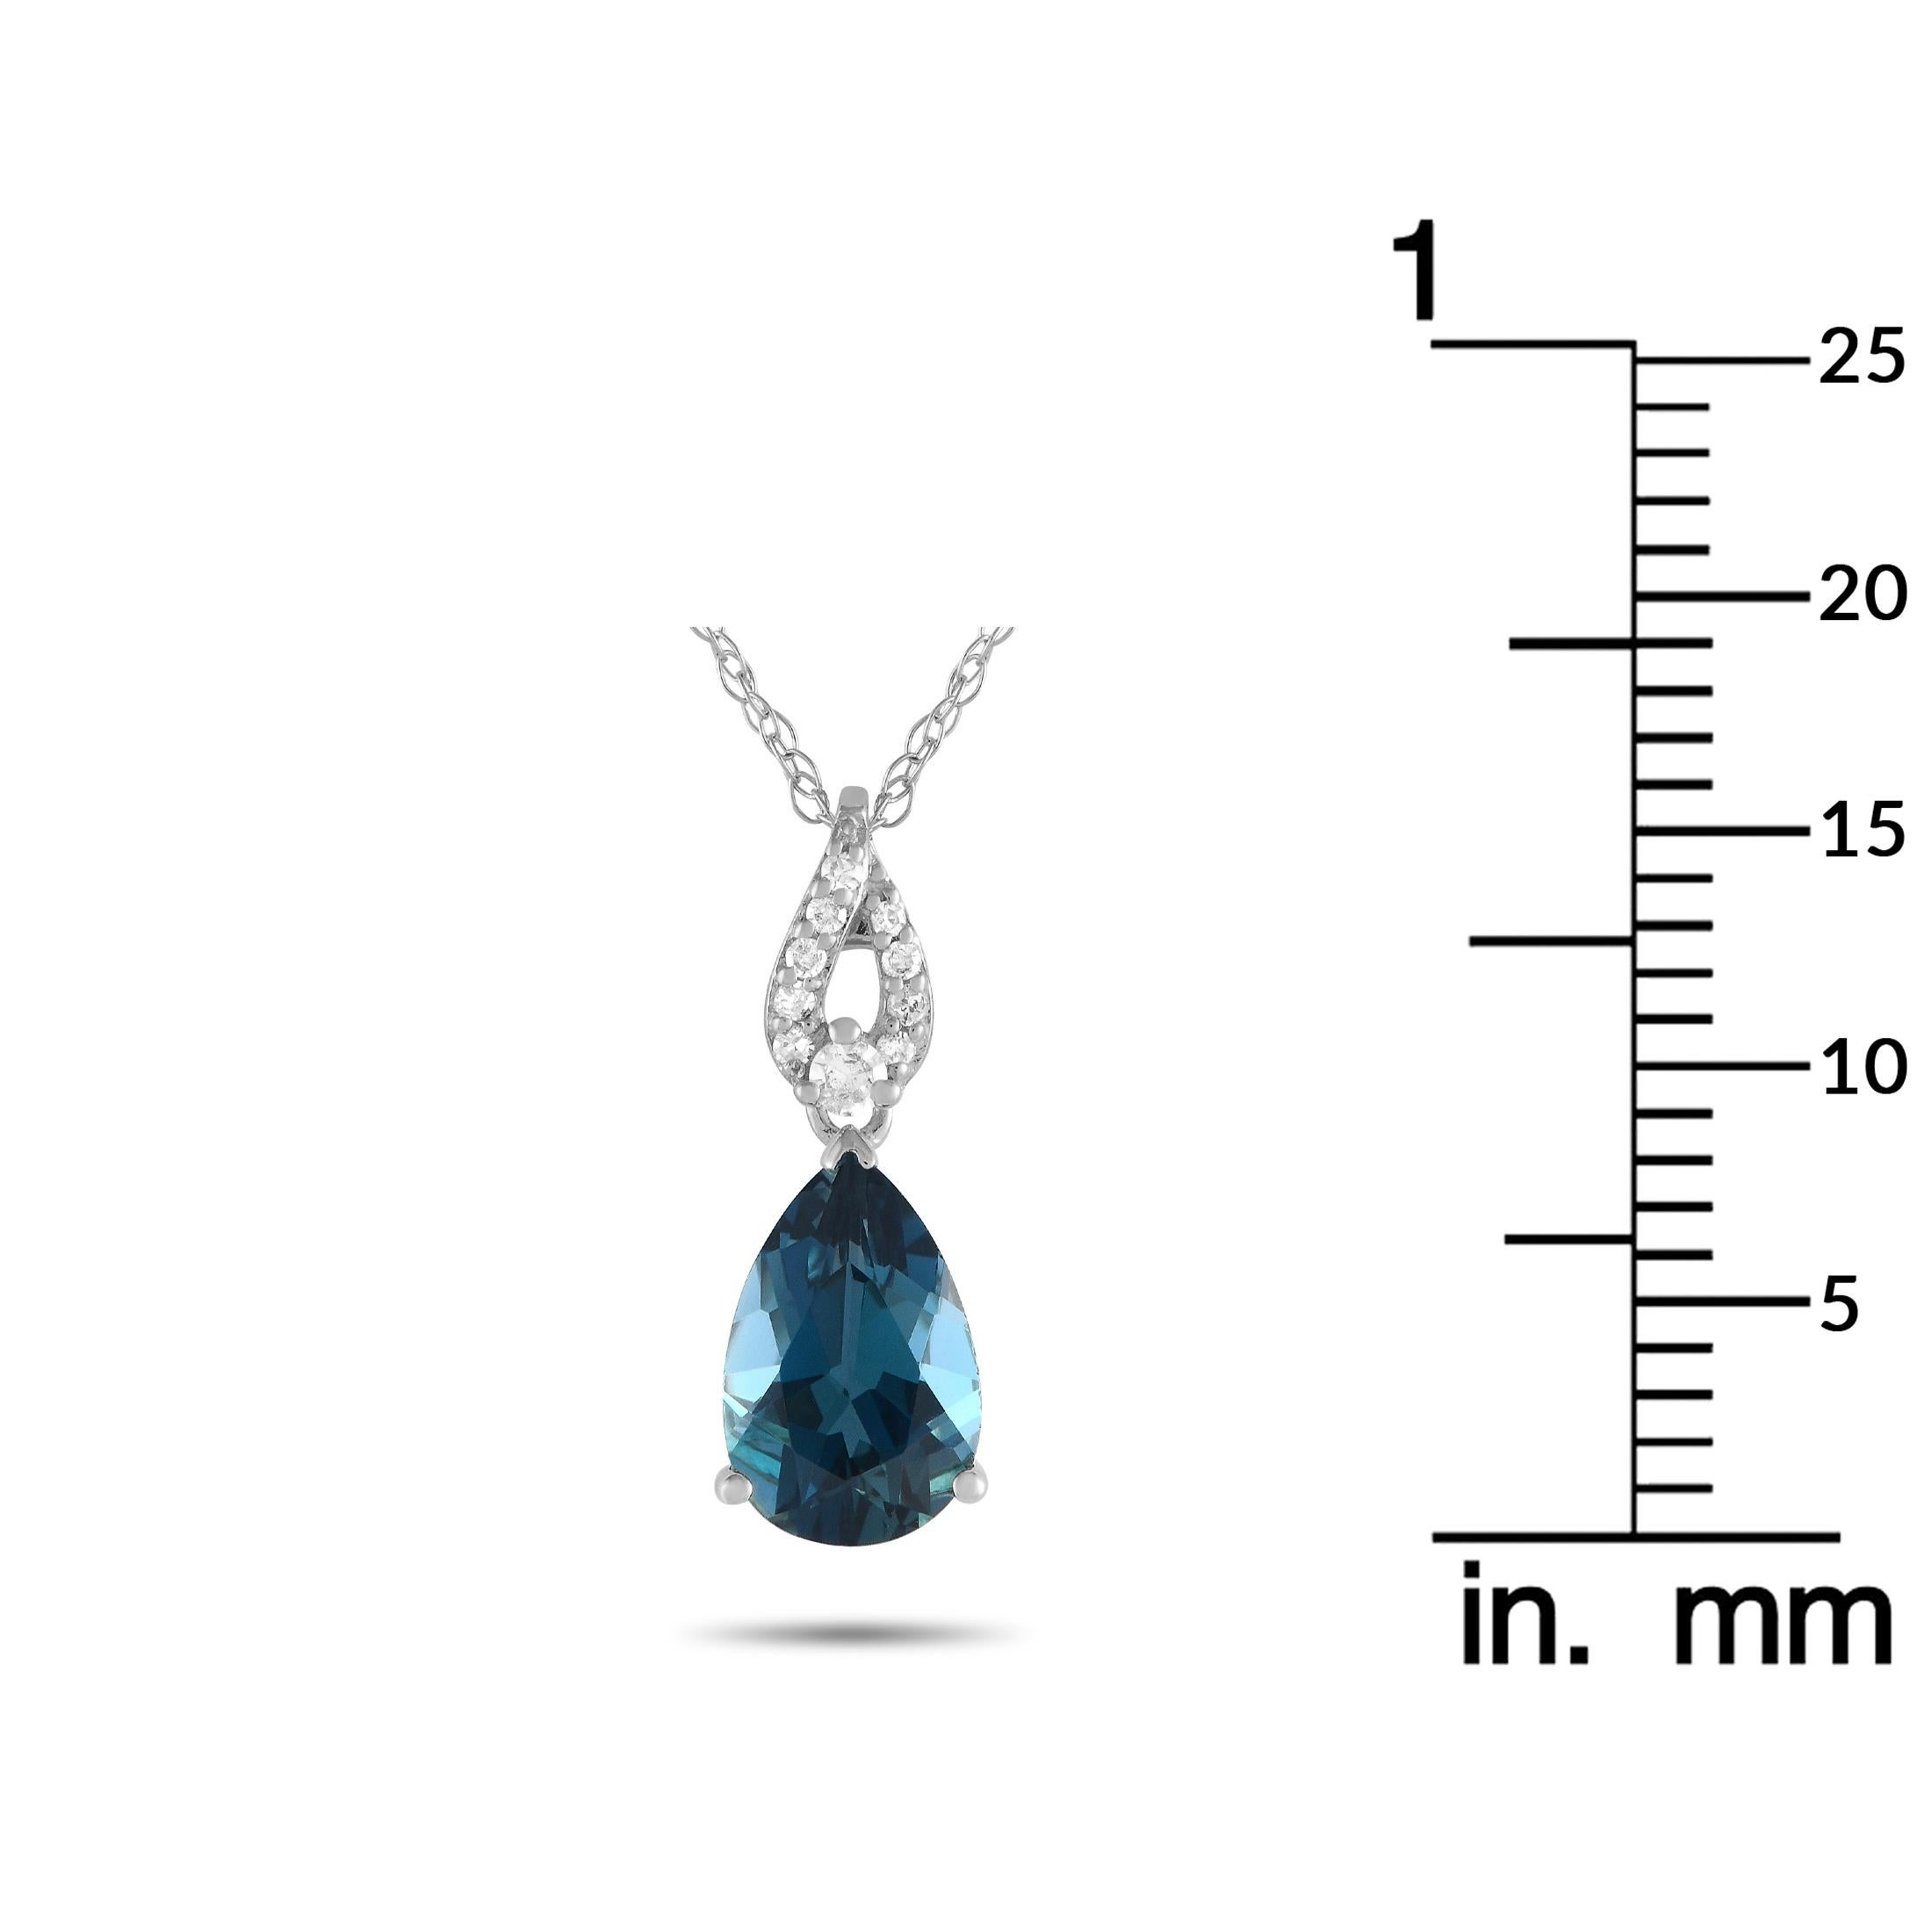 LB Exclusive 14K White Gold 0.06ct Diamond & Blue Topaz Necklace PD4-16184WBT In New Condition For Sale In Southampton, PA